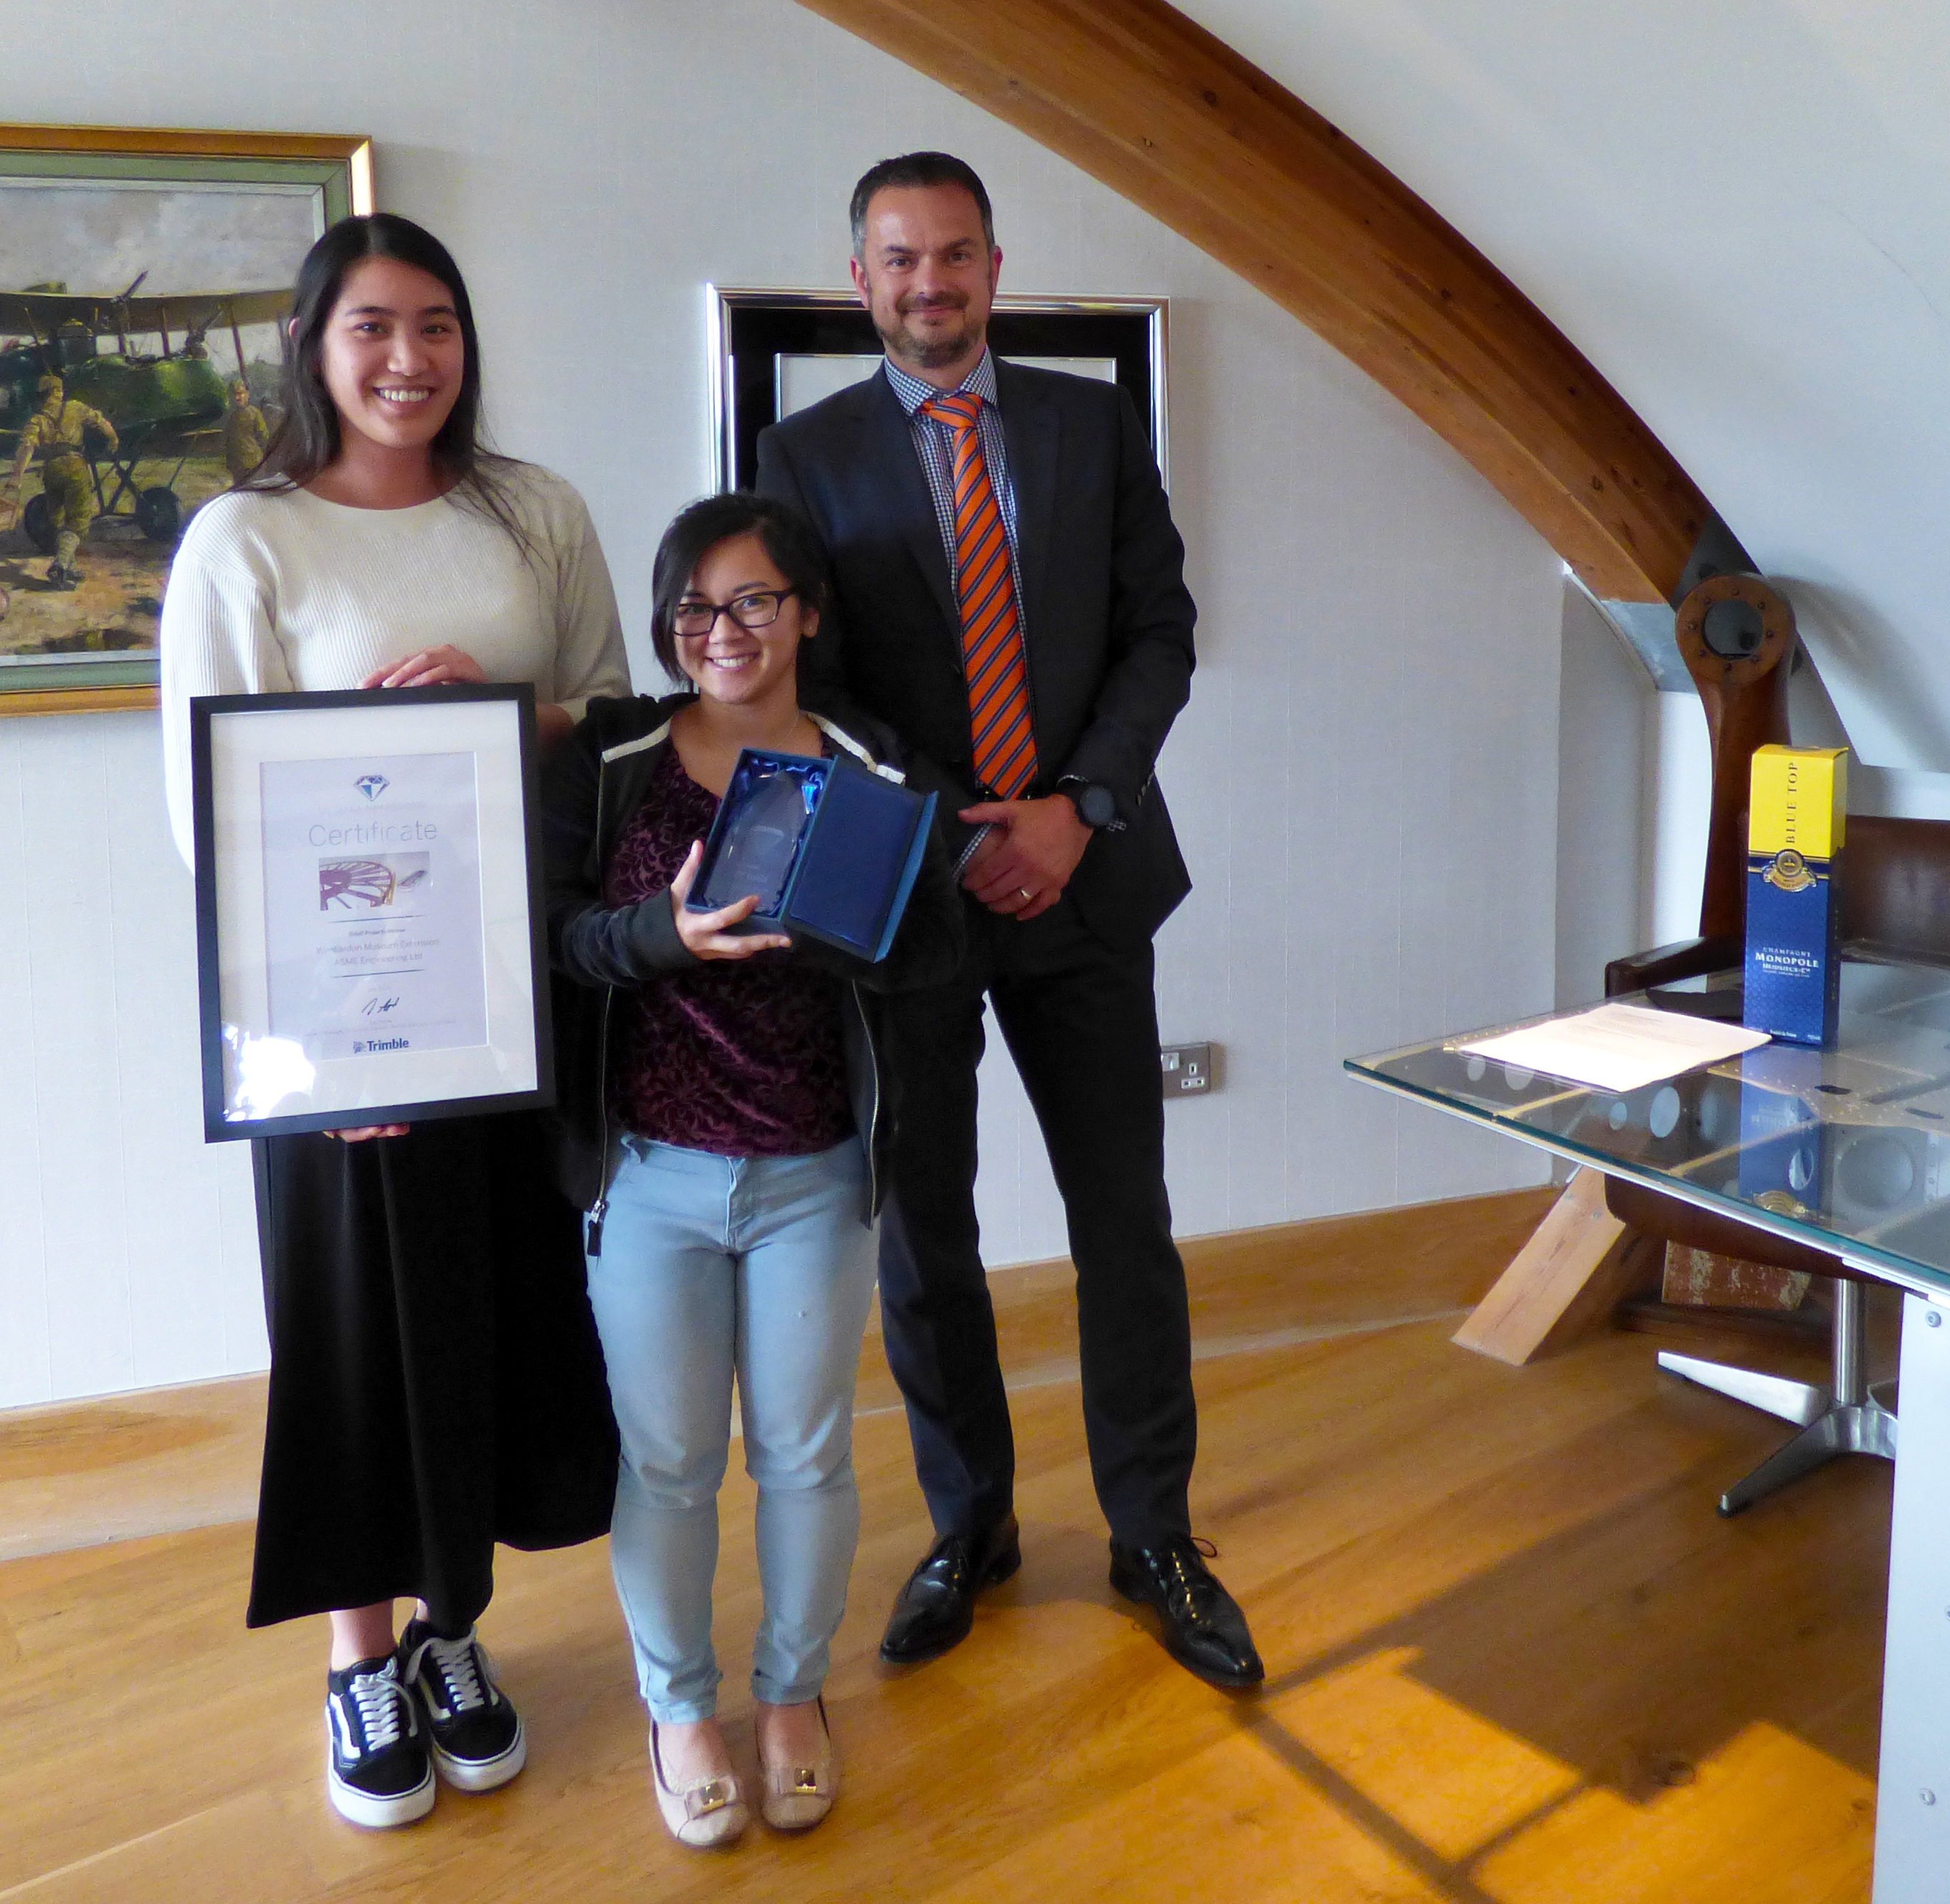 Kim Concepcion (HSEQ Systems Administrator) and Shiela Narito (Drawing Office Manager) with Richard Fletcher (Managing Director of Trimble UK)